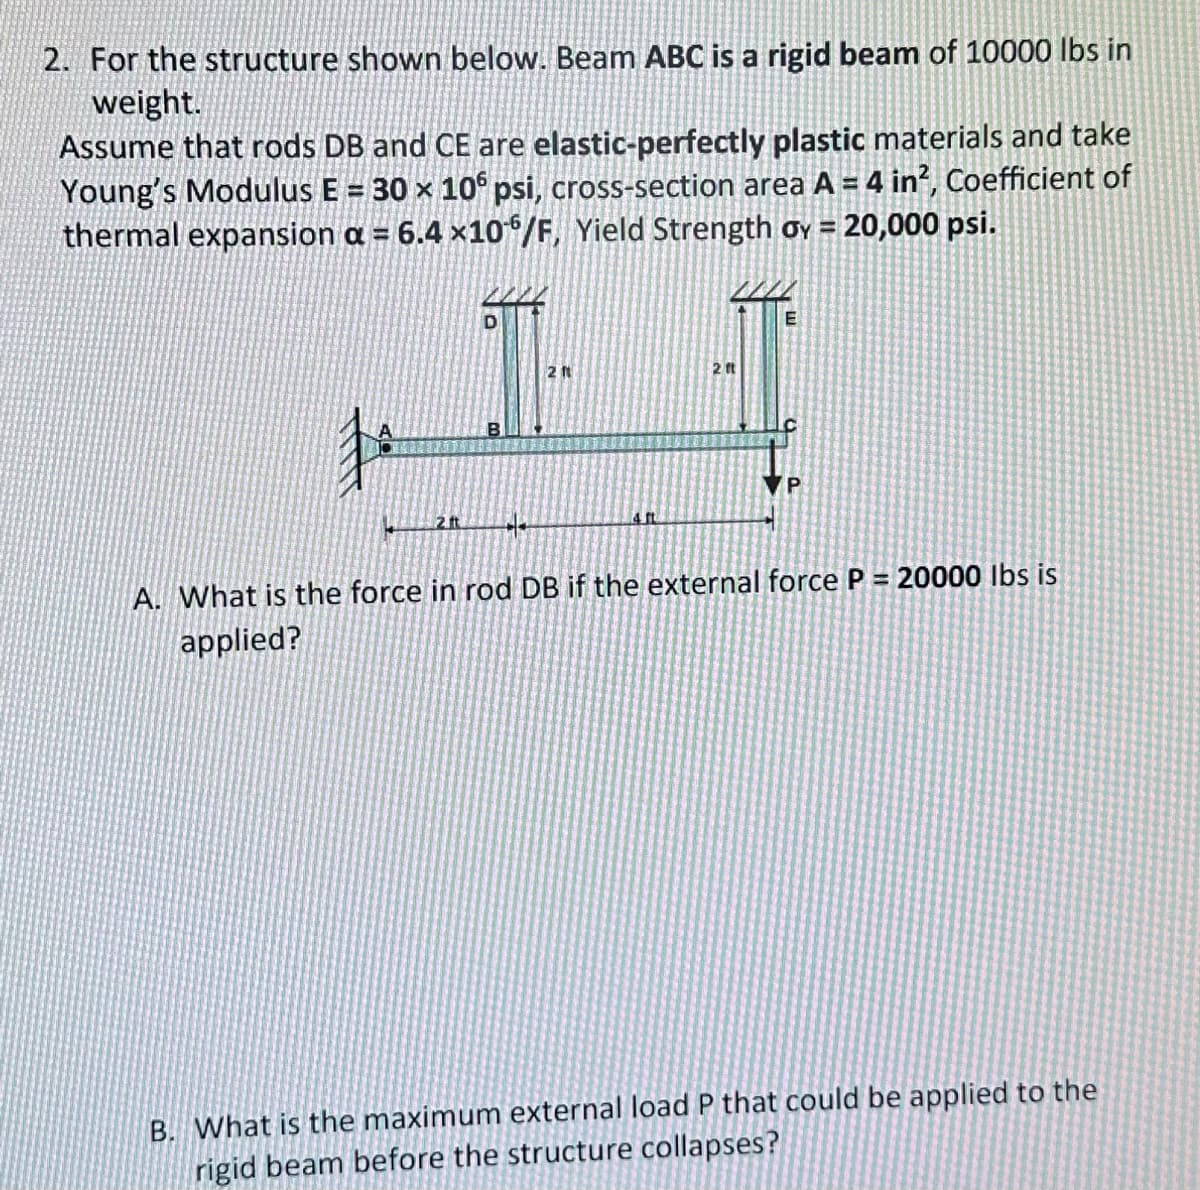 2. For the structure shown below. Beam ABC is a rigid beam of 10000 lbs in
weight.
Assume that rods DB and CE are elastic-perfectly plastic materials and take
Young's Modulus E = 30 × 106 psi, cross-section area A = 4 in², Coefficient of
thermal expansion a = 6.4 x106/F, Yield Strength oy = 20,000 psi.
2. ft
B
2 ft
£. ft
2 ft
E
P
A. What is the force in rod DB if the external force P = 20000 lbs is
applied?
B. What is the maximum external load P that could be applied to the
rigid beam before the structure collapses?